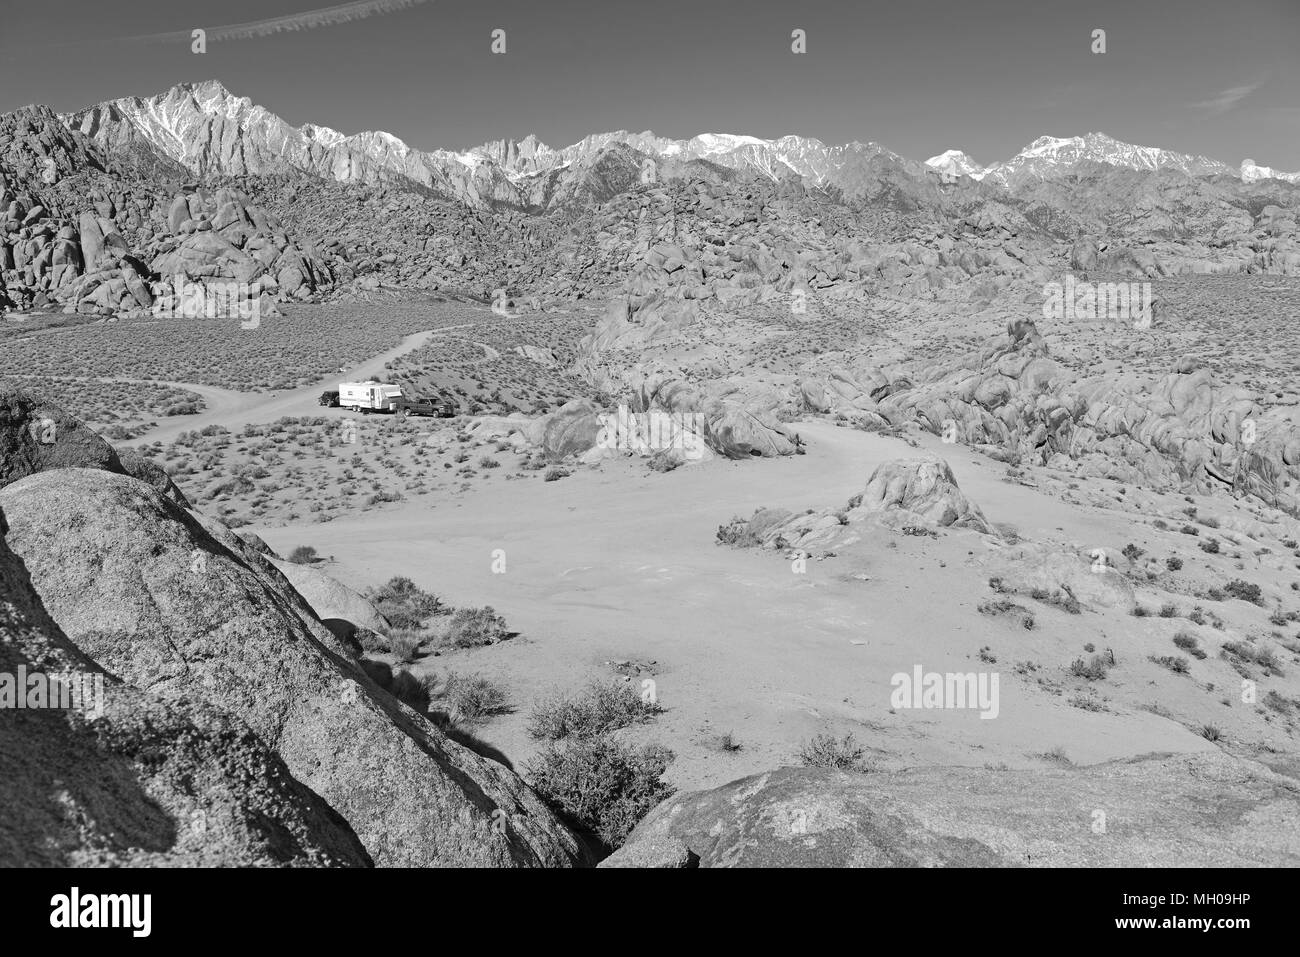 Mount Whitney and the Alabama Hills, California 14er, state high point and highest peak in the lower 48 states, located in the Sierra Nevada Mountains Stock Photo